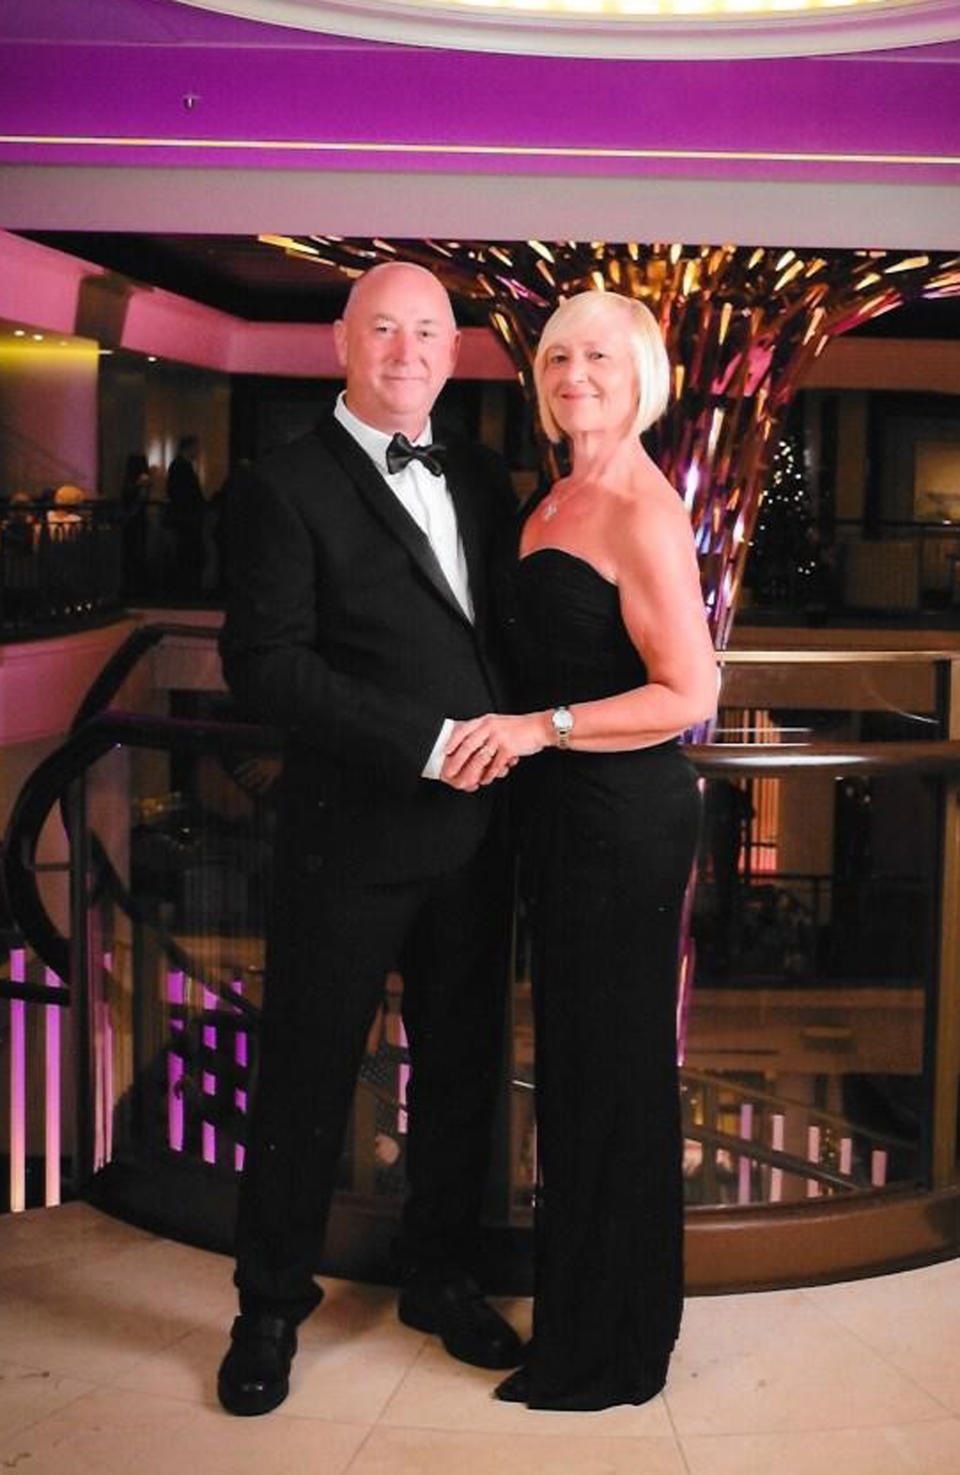 Sharon Gauld and husband Ian show off their weight loss together